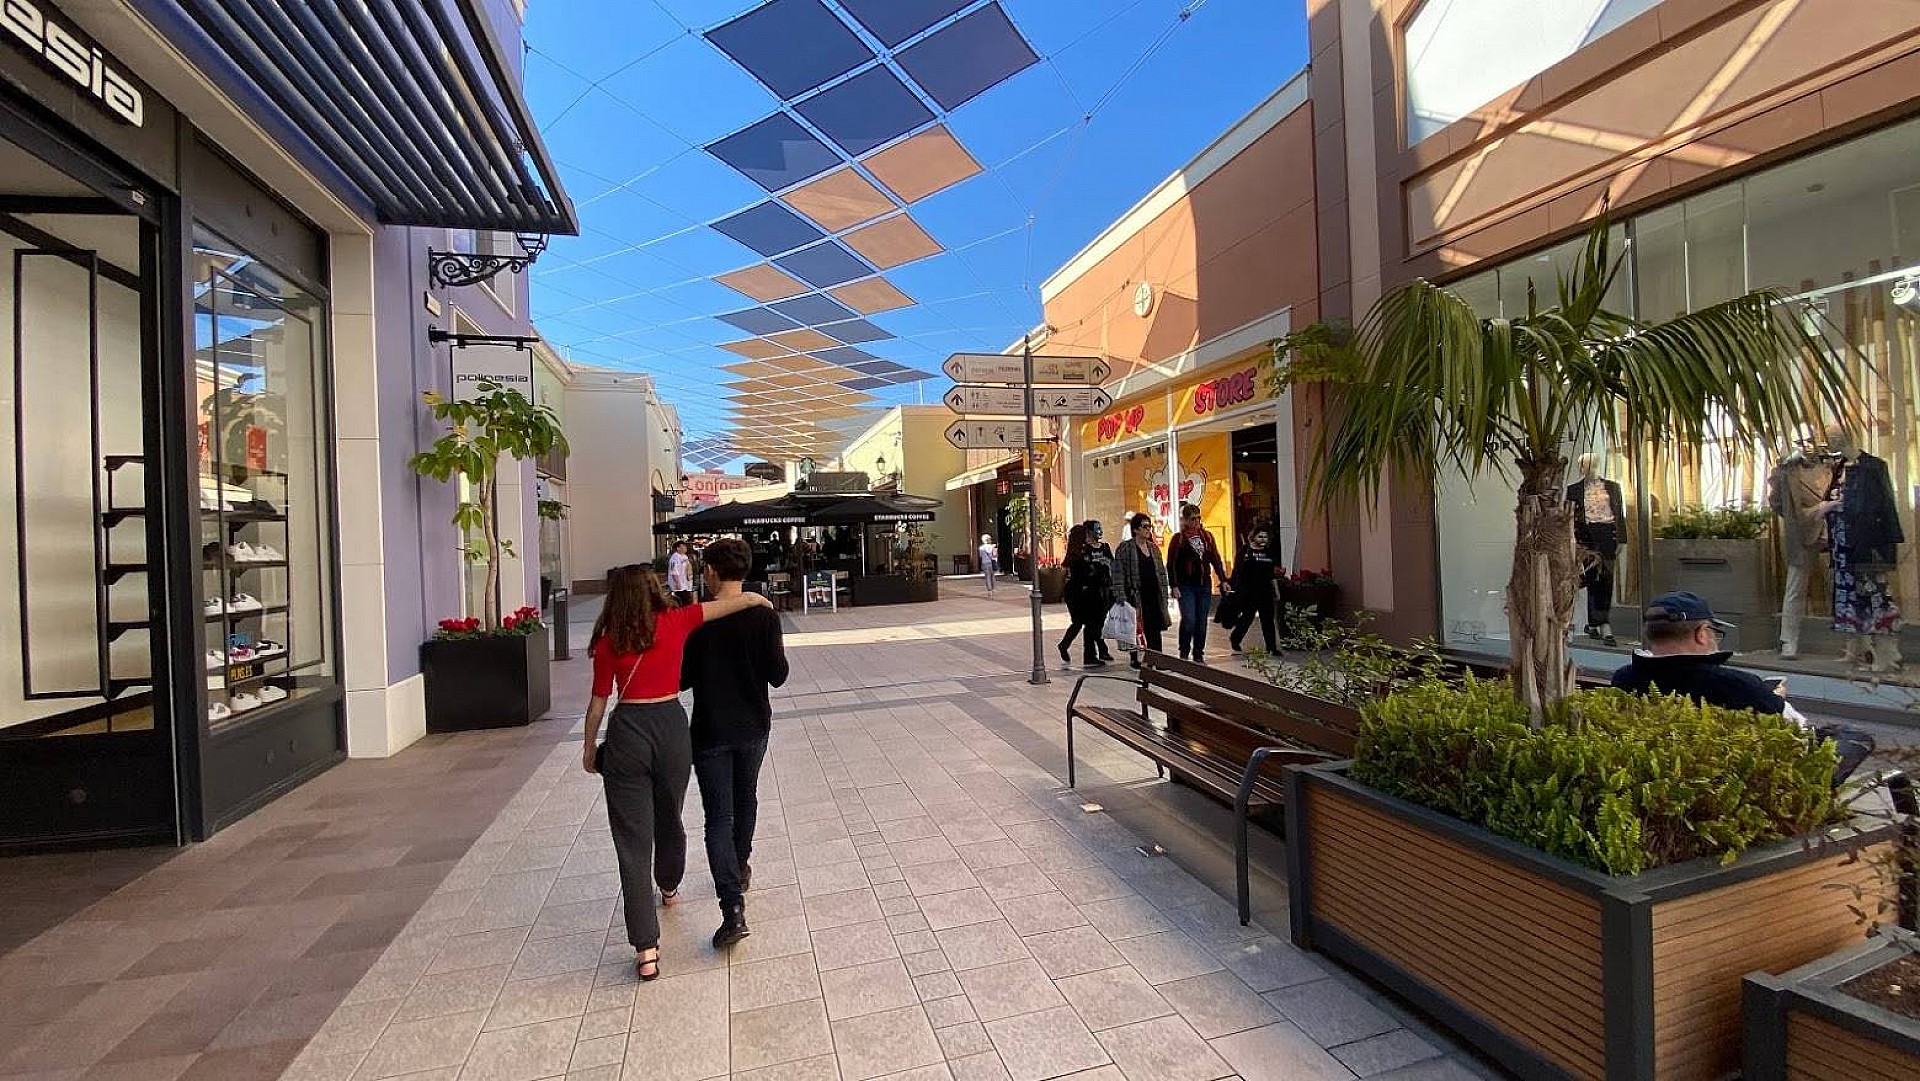 La Zenia Boulevard, the shopping and entertainment experience